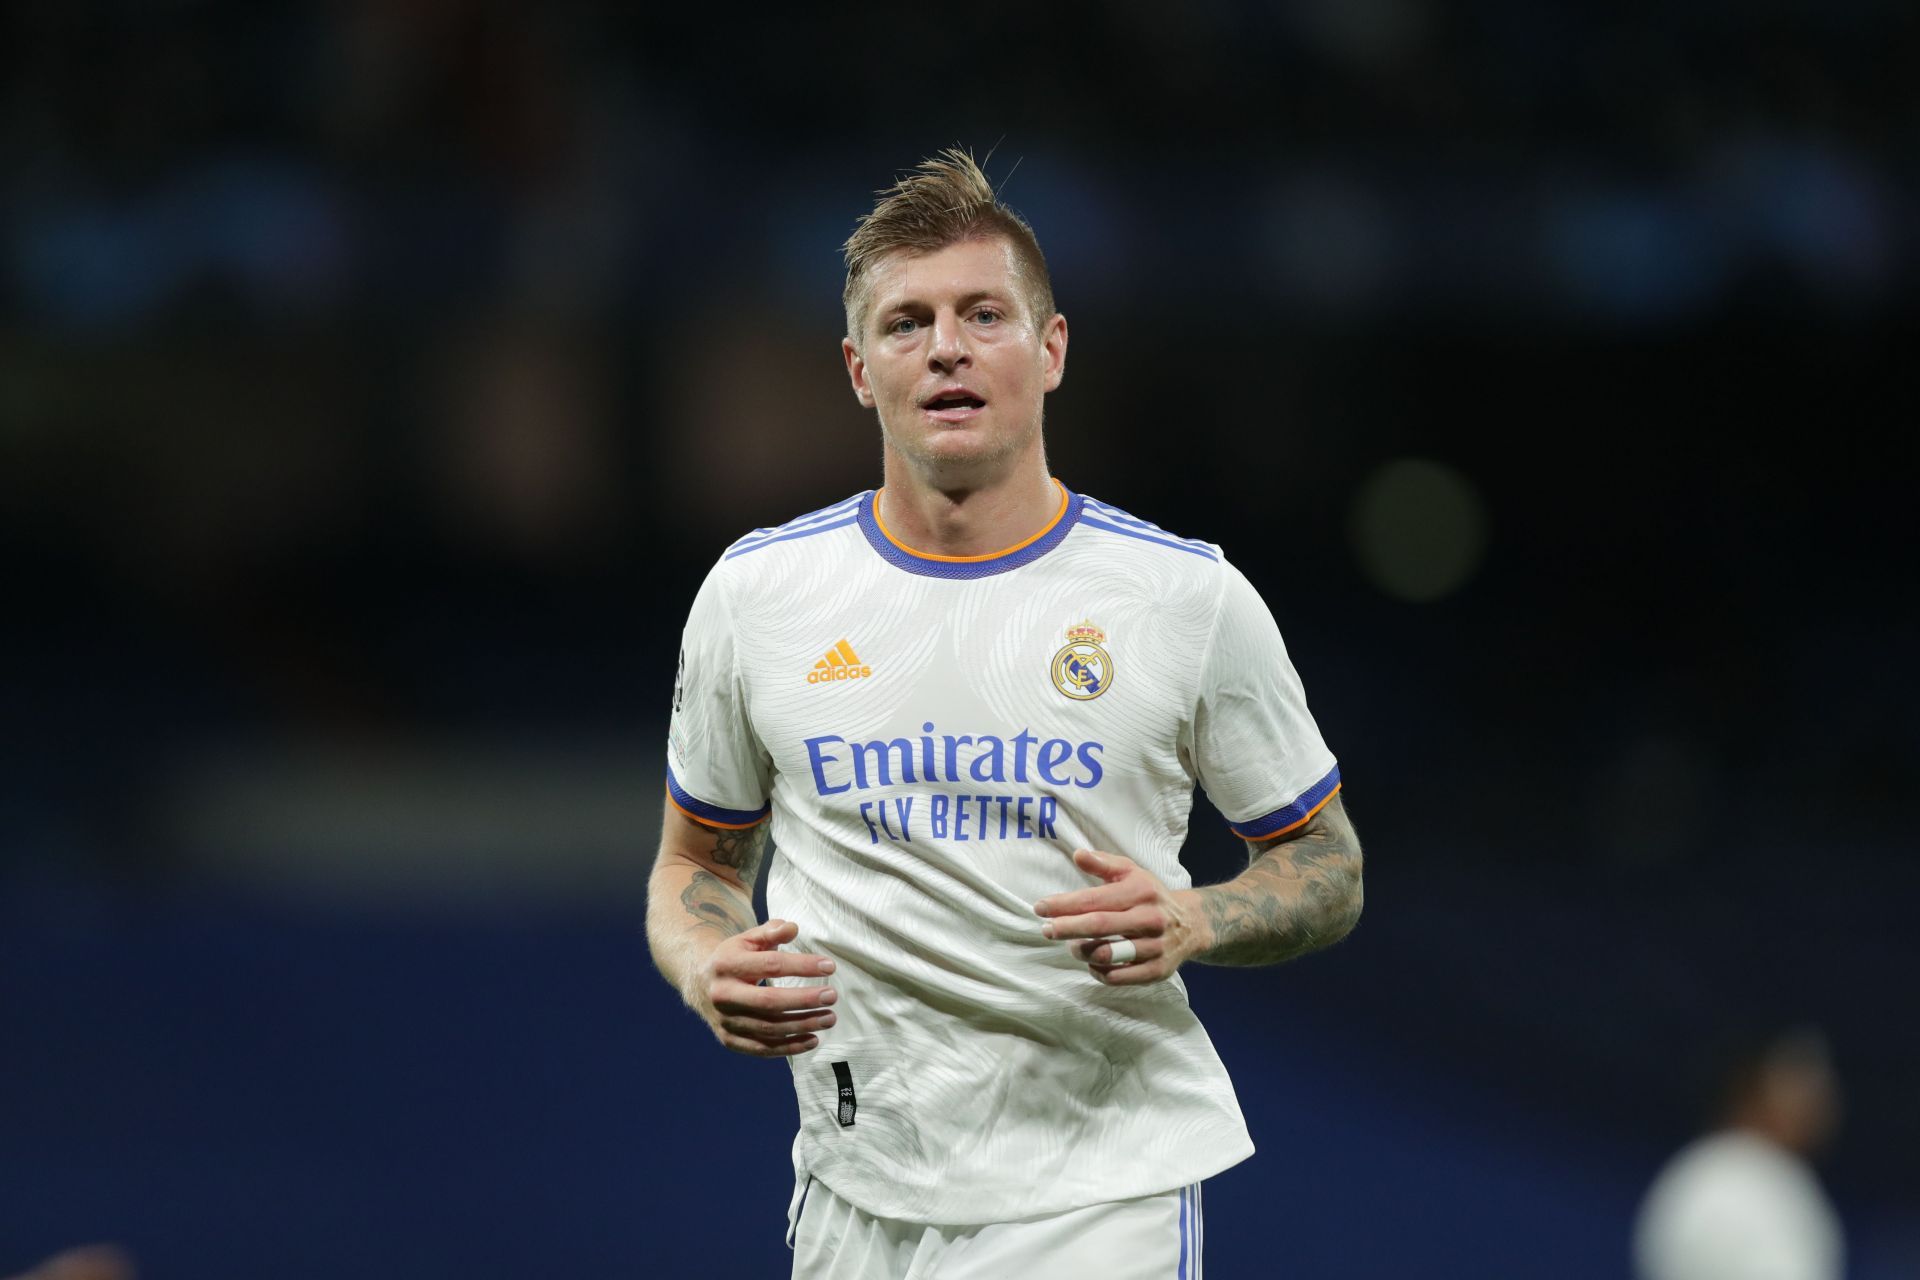 Toni Kroos ranks first in average passes per game for Real Madrid this season.